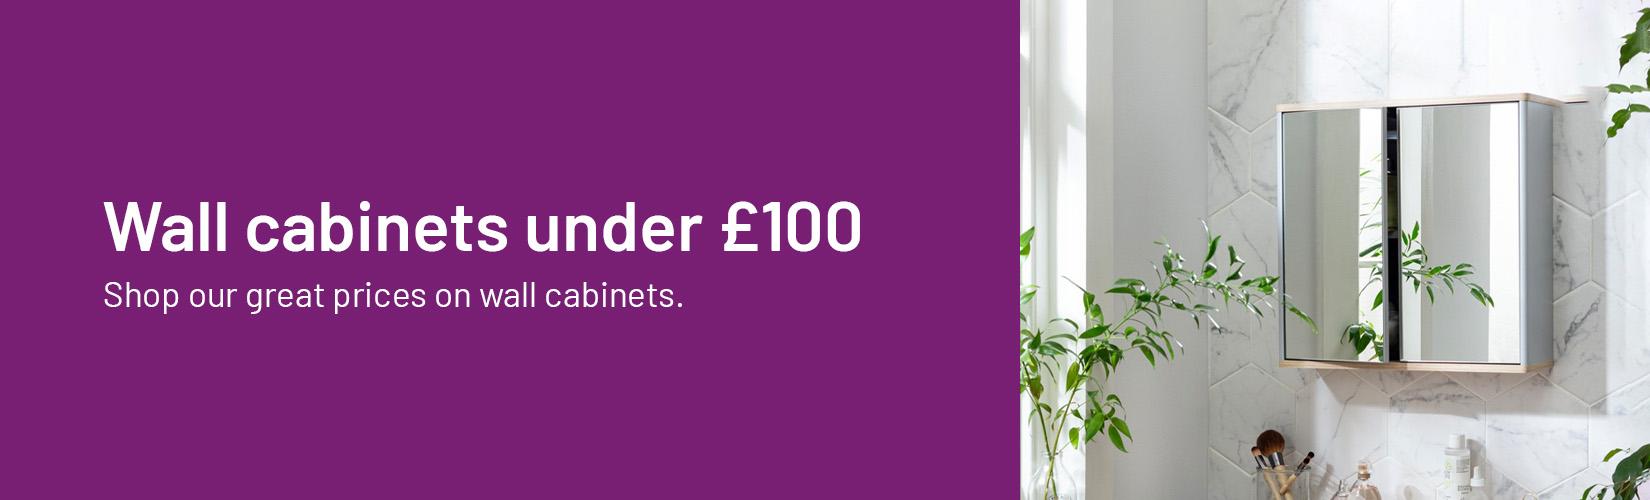 Wall cabinets under £100. Shop our great prices on wall cabinets.